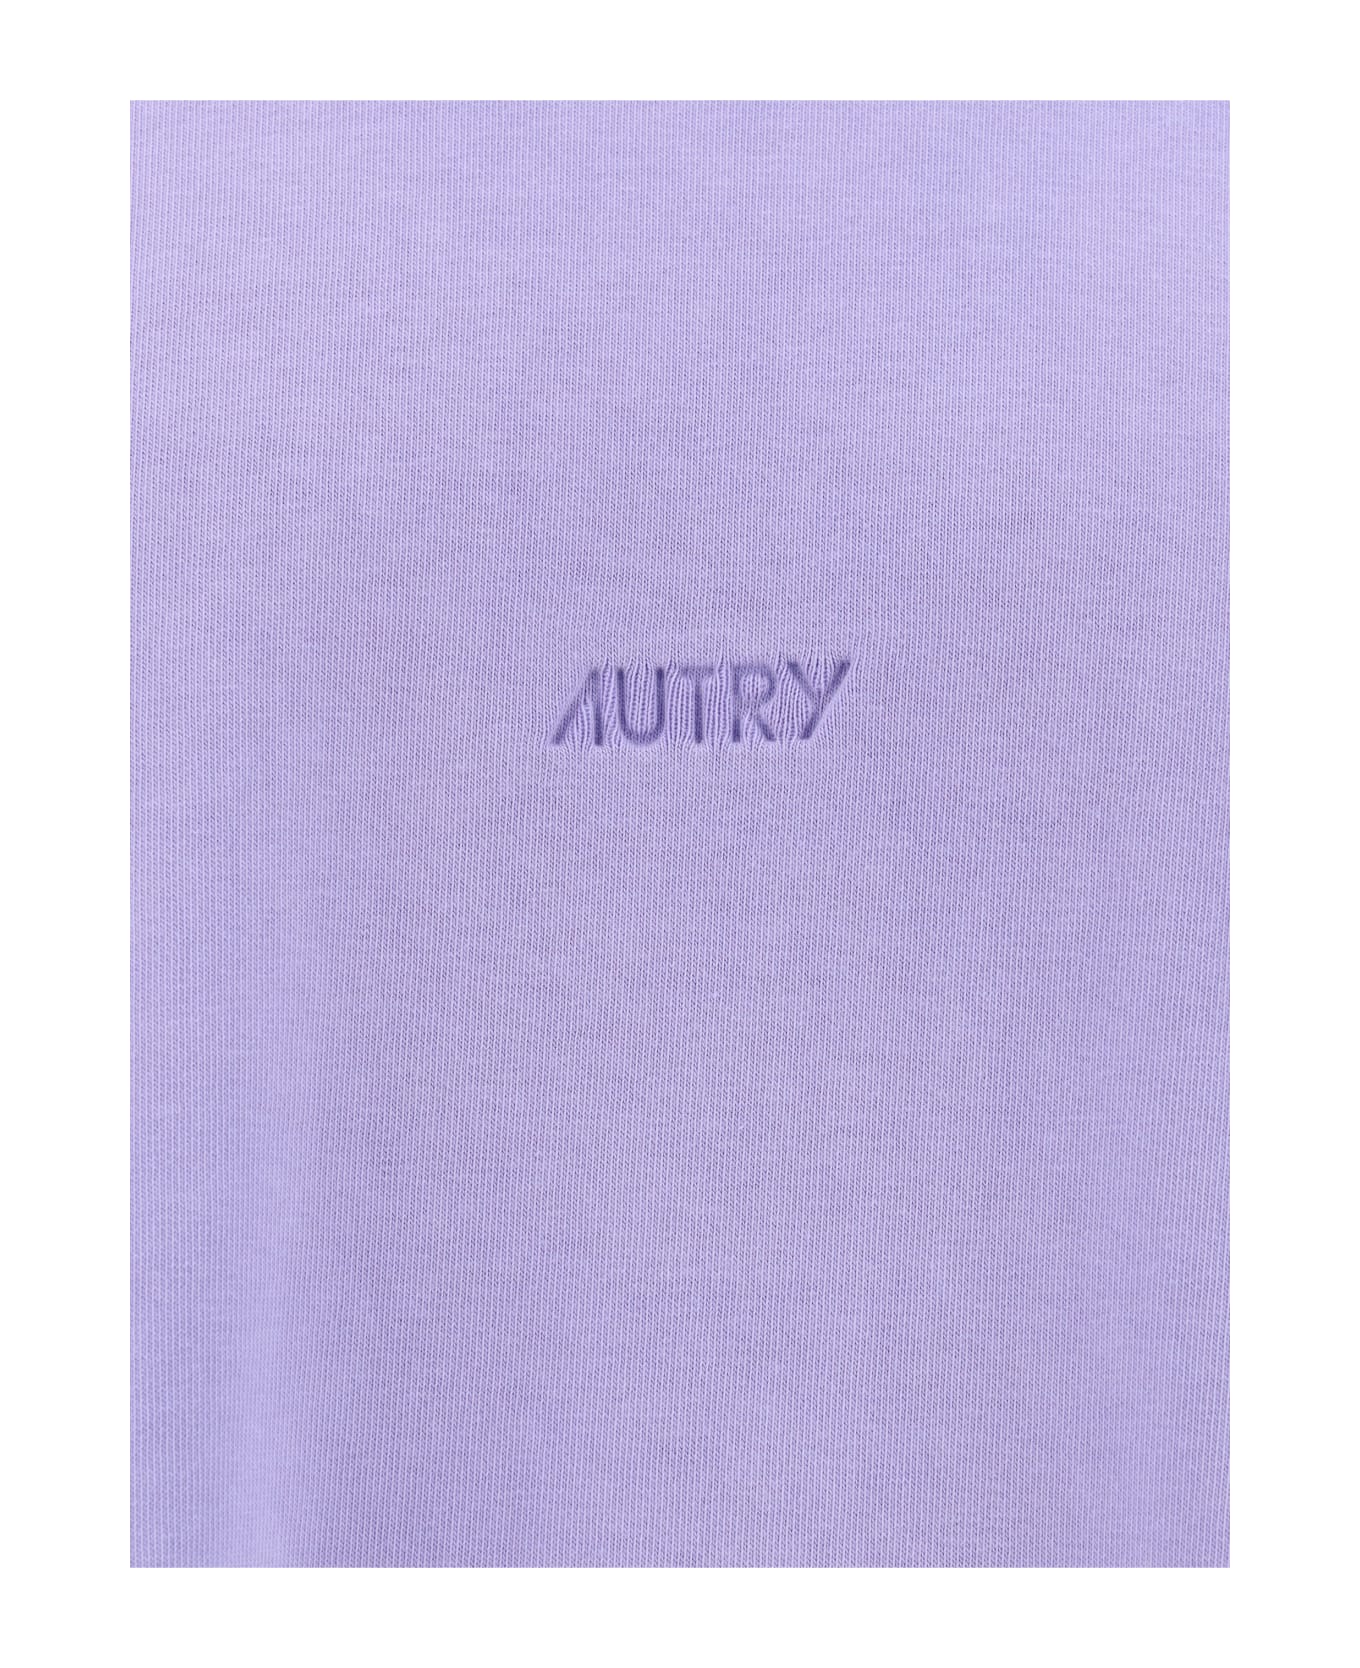 Autry T-shirt - Lilac シャツ